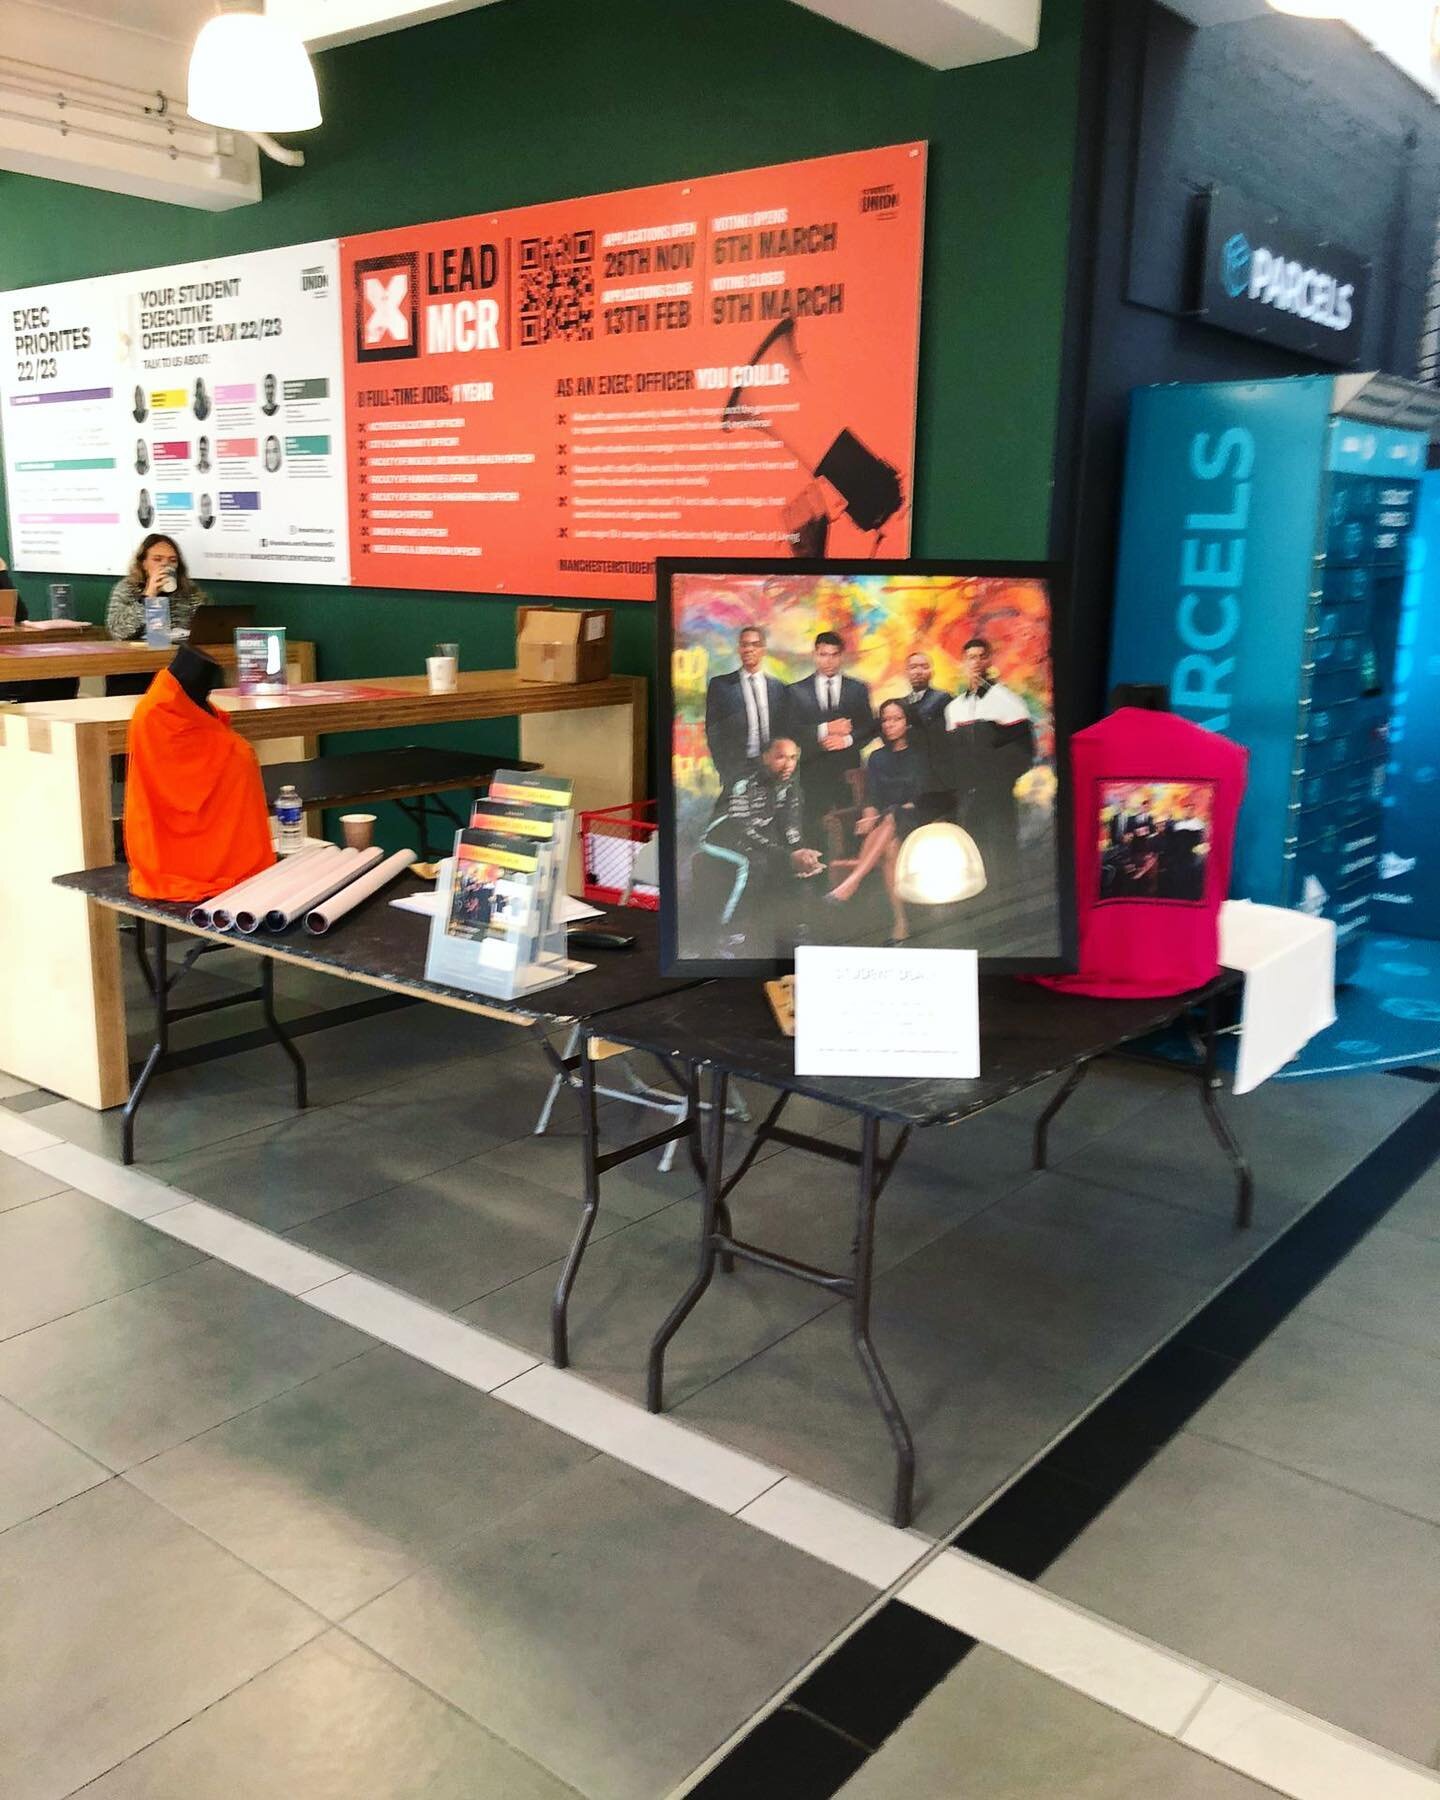 Having a wonderful time bringing the message of Beyond Lies More to Manchester Uni! 🙌 

Our little pop up is here today and tomorrow, be sure to pop over and say hi! #manchesterstudents #manchesteruniversity #artmerch #beyondliesmore